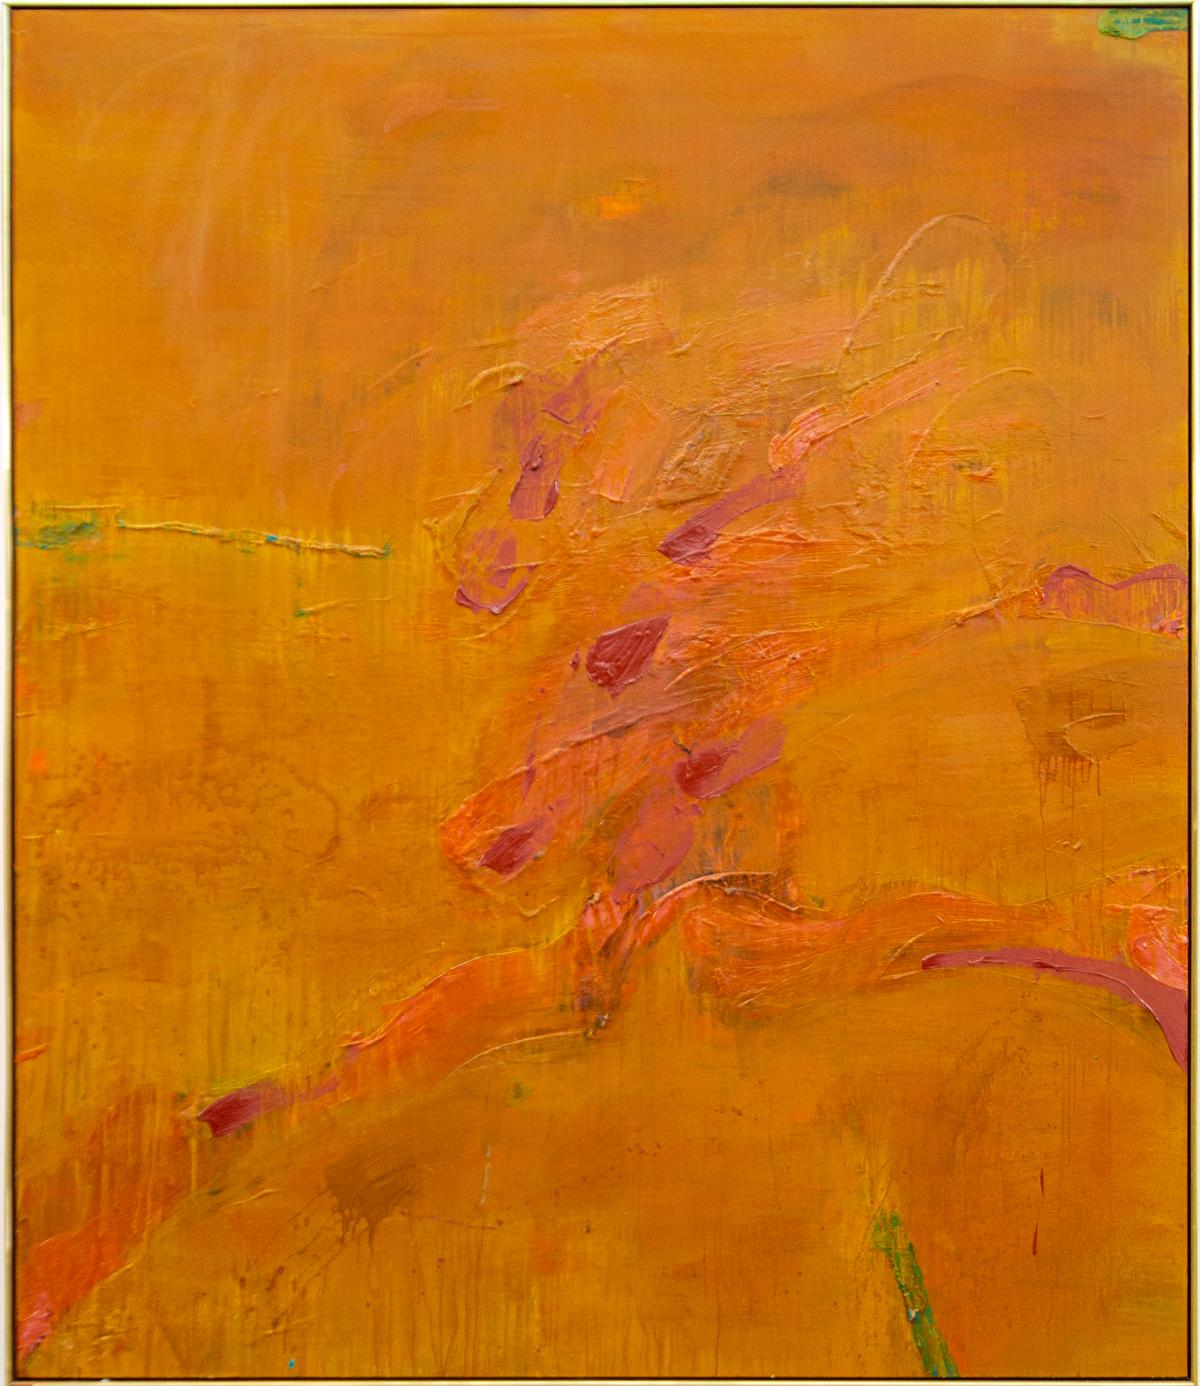 Graham Coughtry Abstract Painting - Rajasthan - large, bold, gestural abstract, expressionist, acrylic on canvas